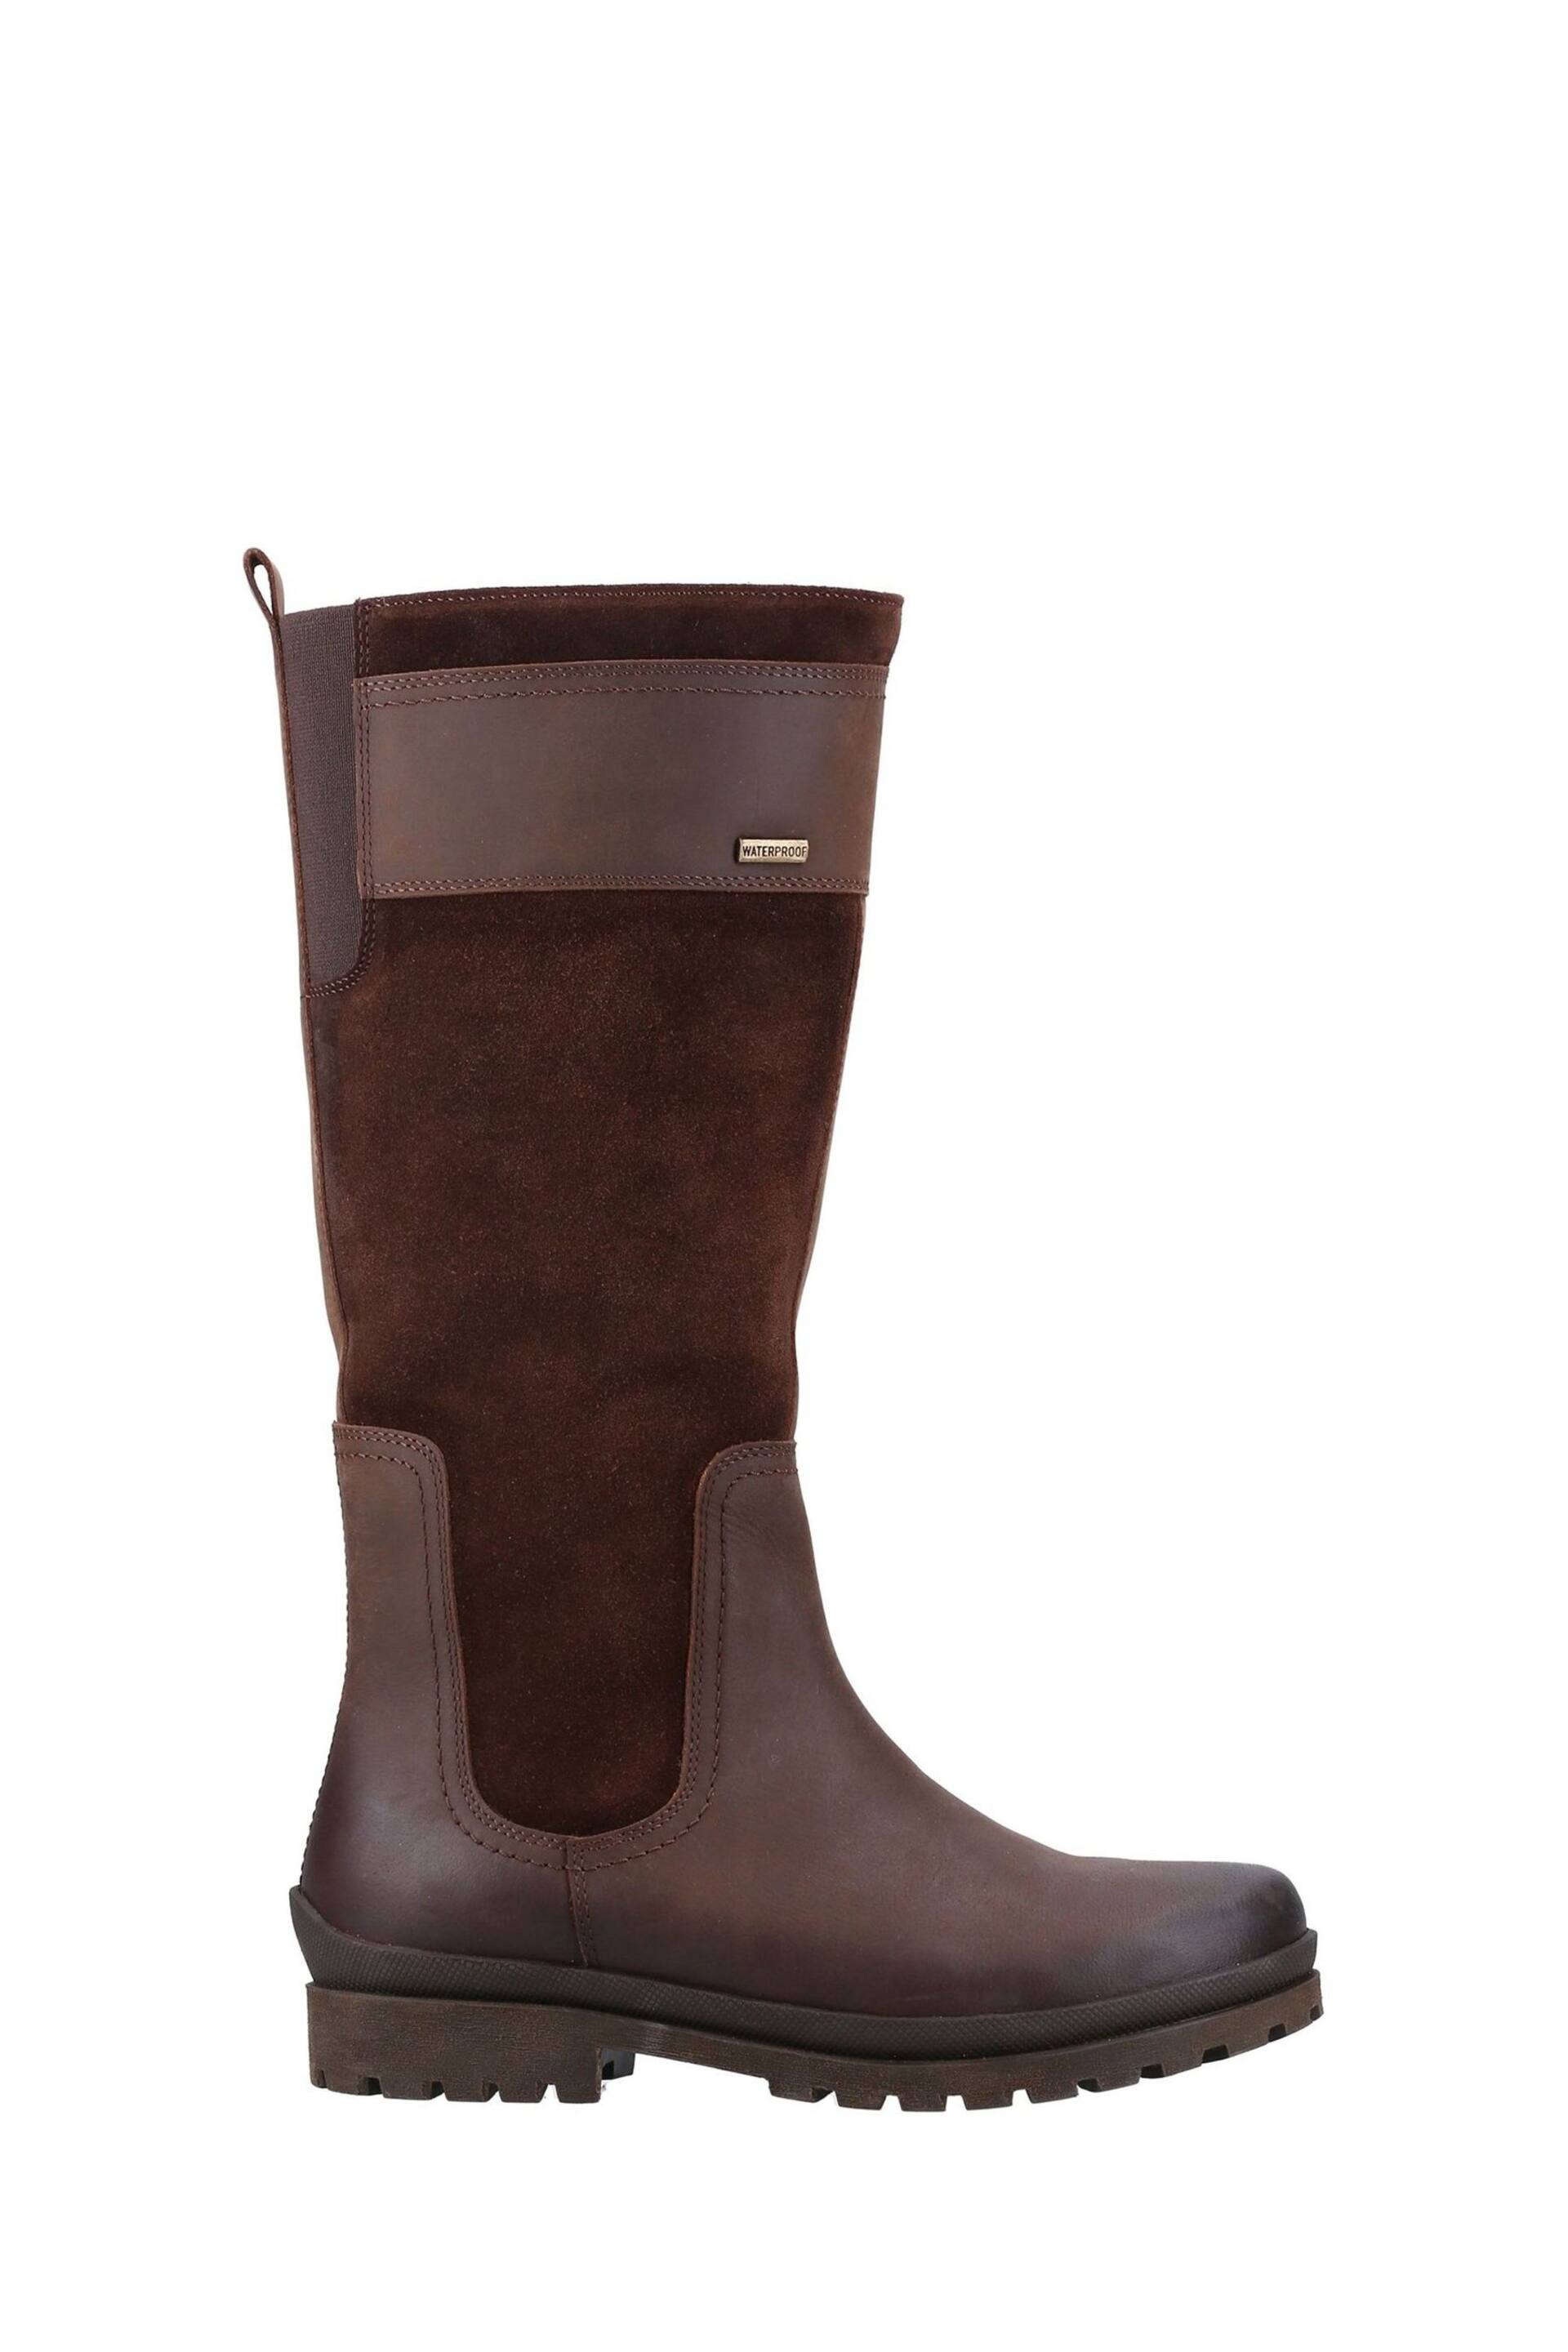 Cotswolds Painswick Brown Boots - Image 3 of 4